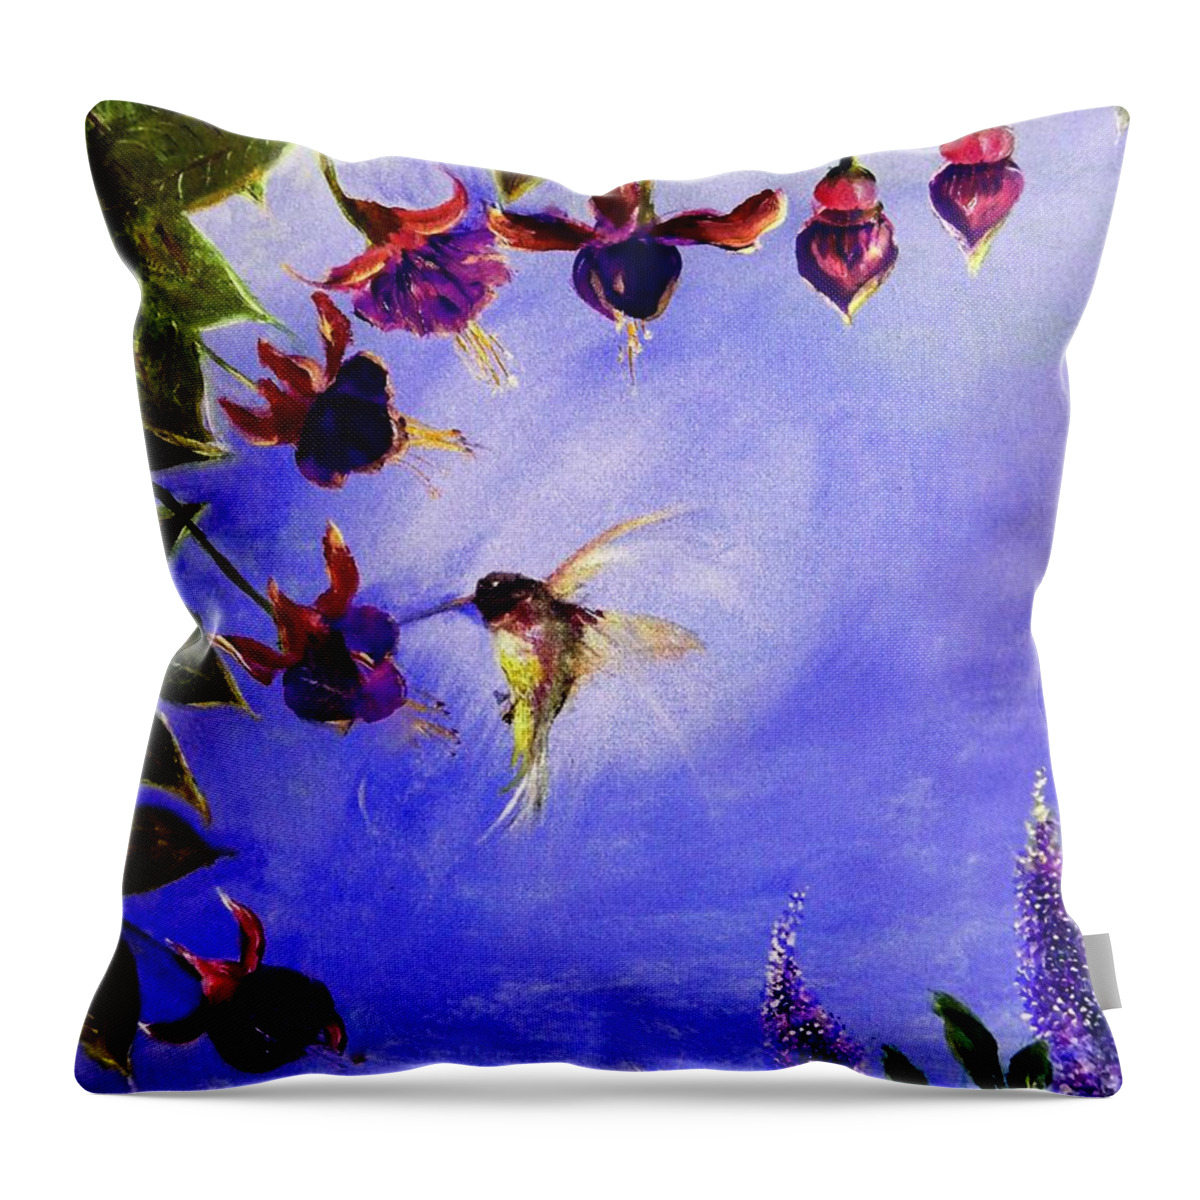 Fabulous Throw Pillow featuring the painting Fabulous Fast Food by Lisa Kaiser